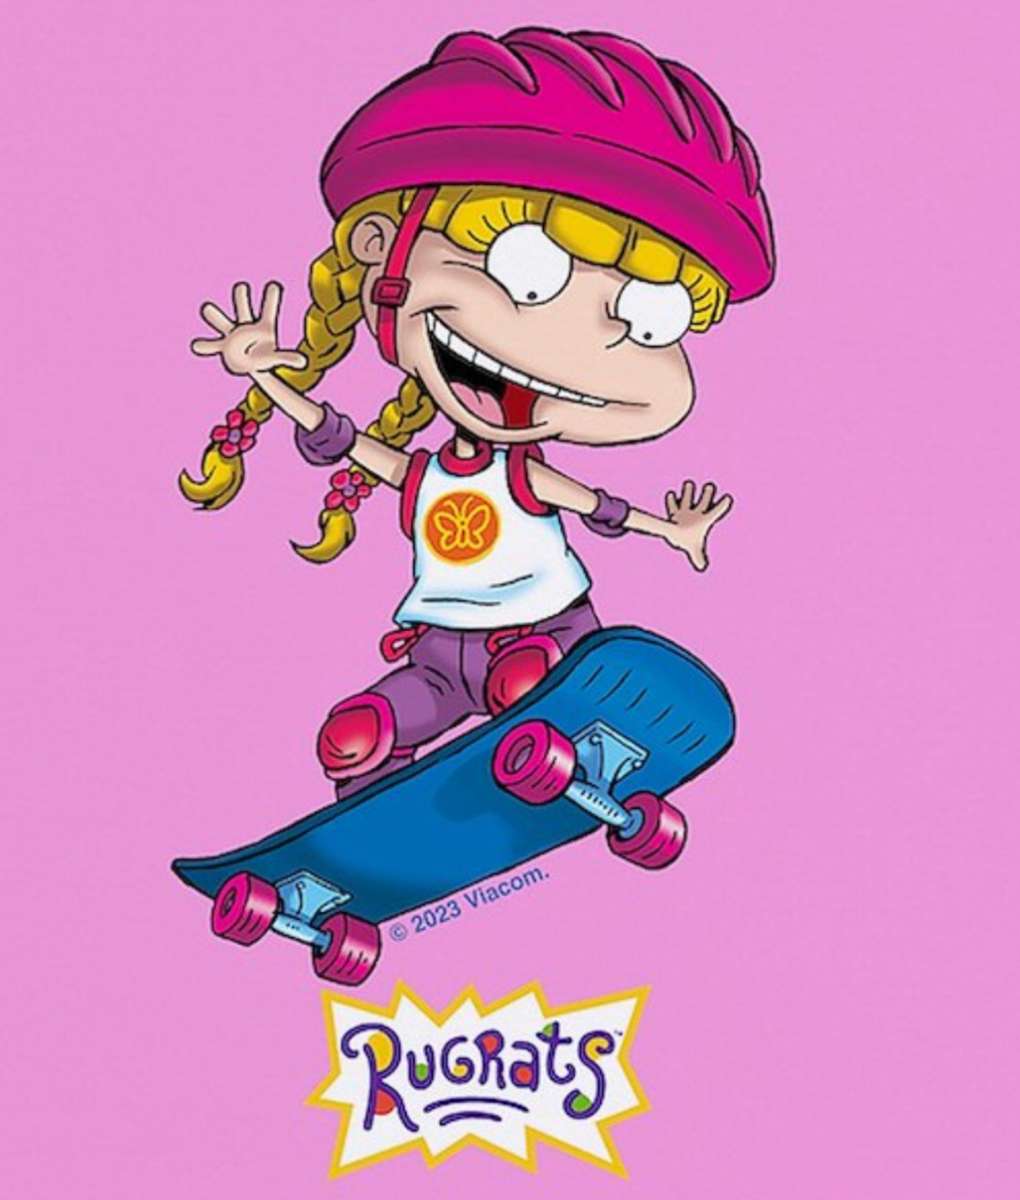 Skateboarding Angelica❤️❤️❤️❤️❤️❤️ jigsaw puzzle online